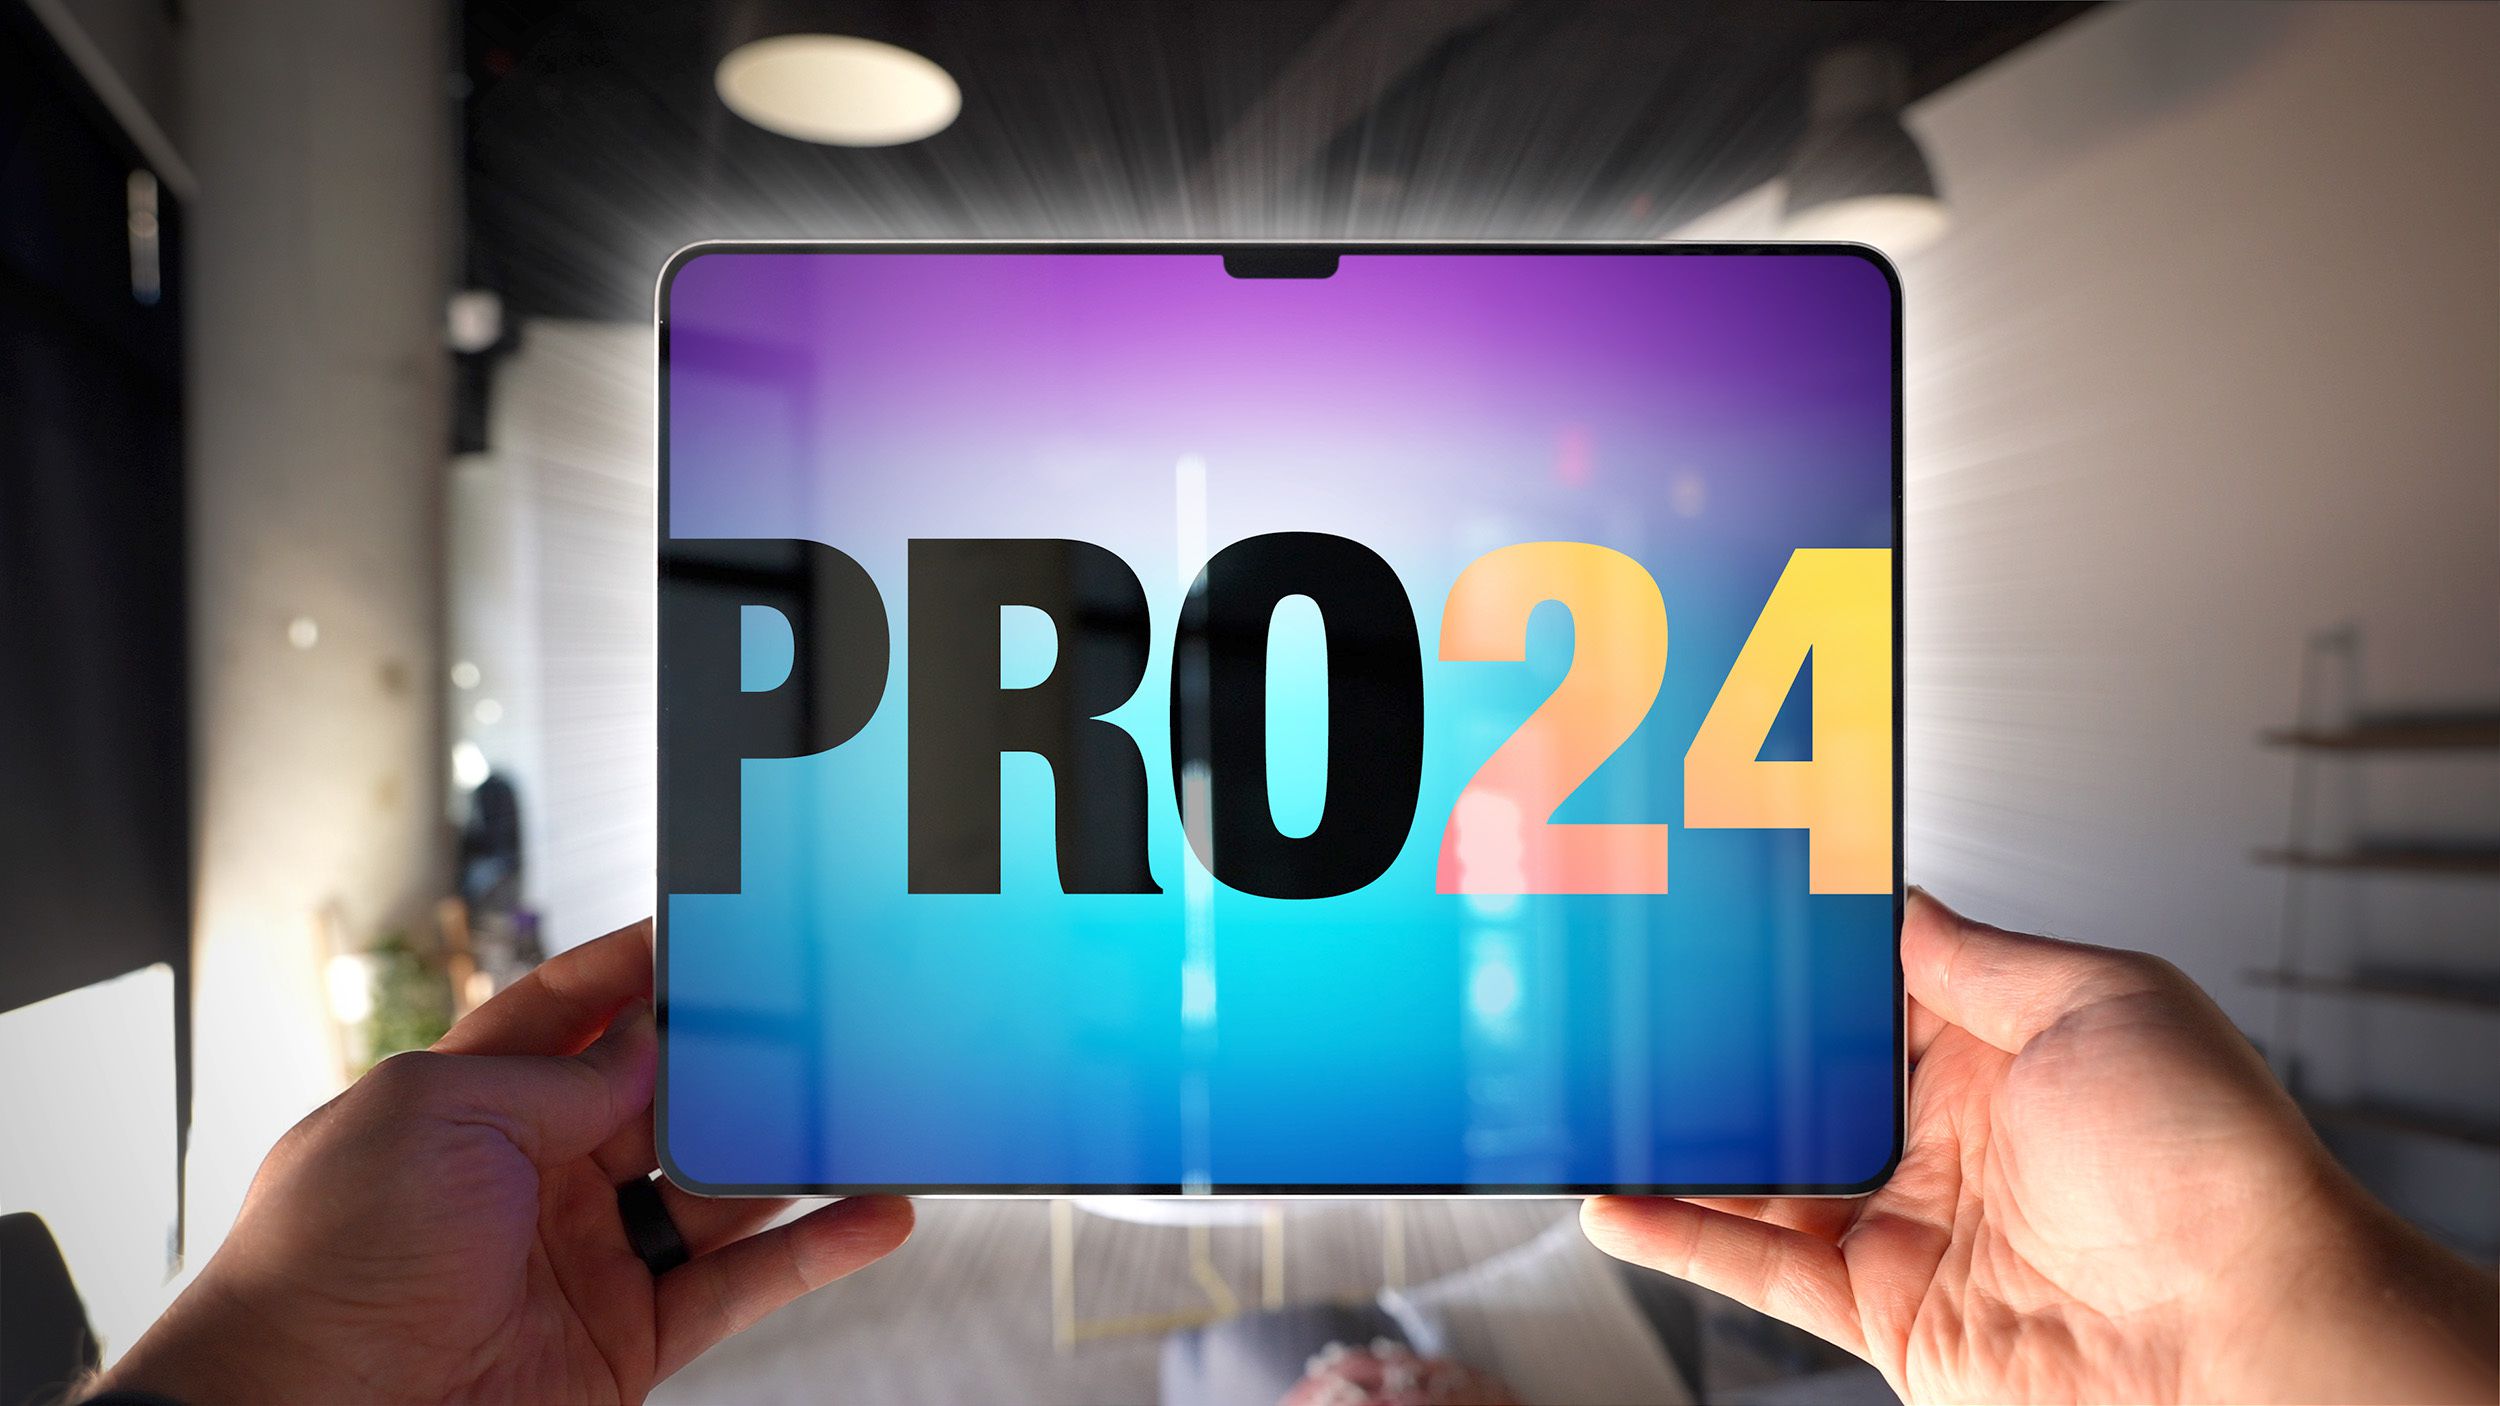 14-Inch iPad Pro With Mini-LED Display Rumored to Launch in Early 2023 -  MacRumors